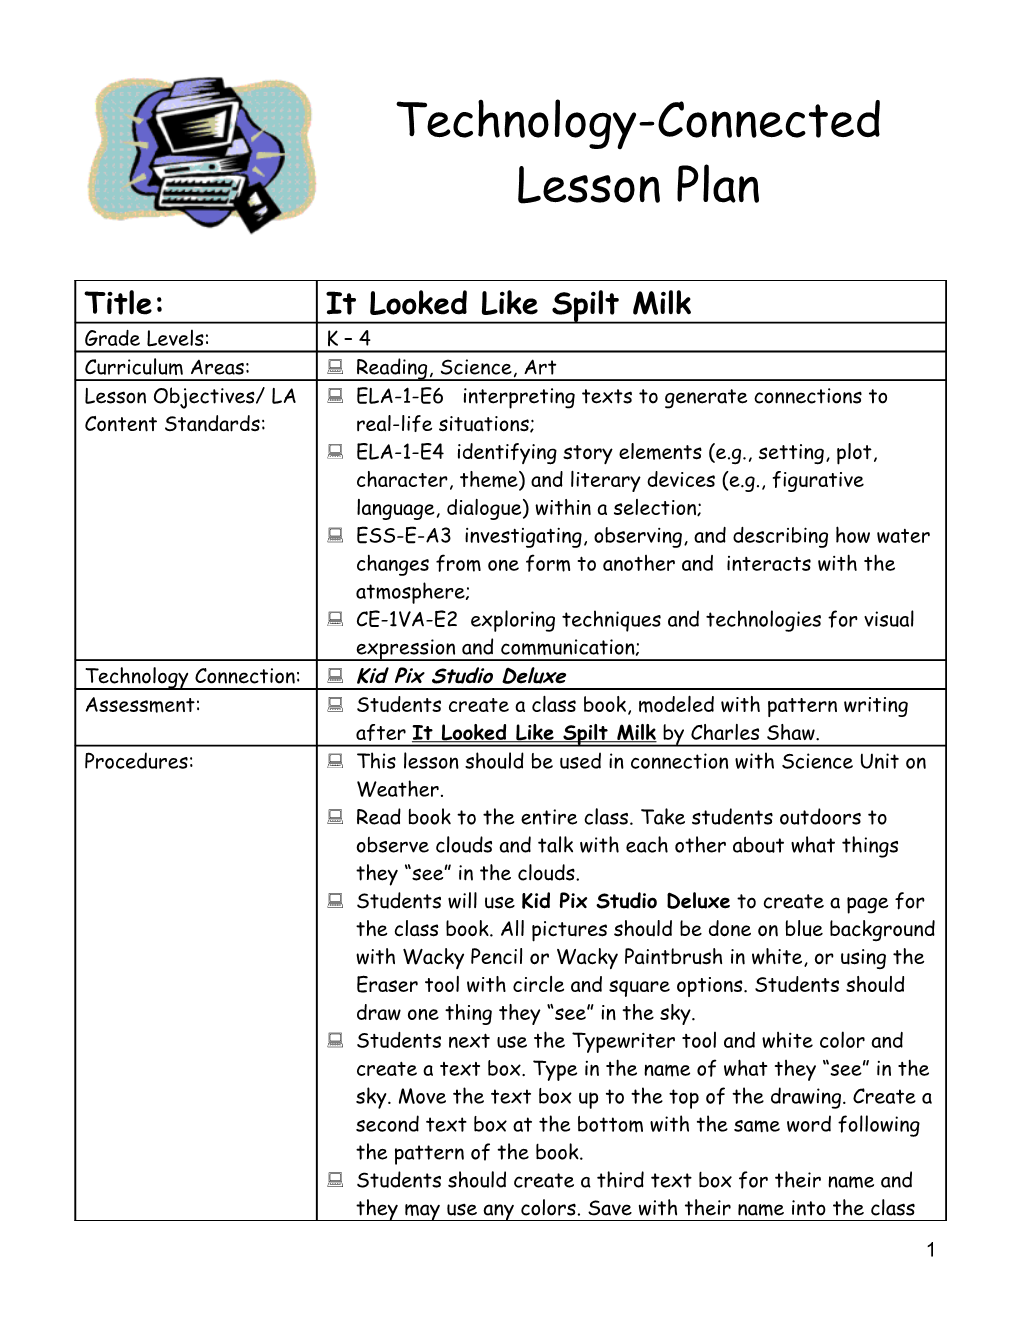 Technology-Connected Lesson Plan s5